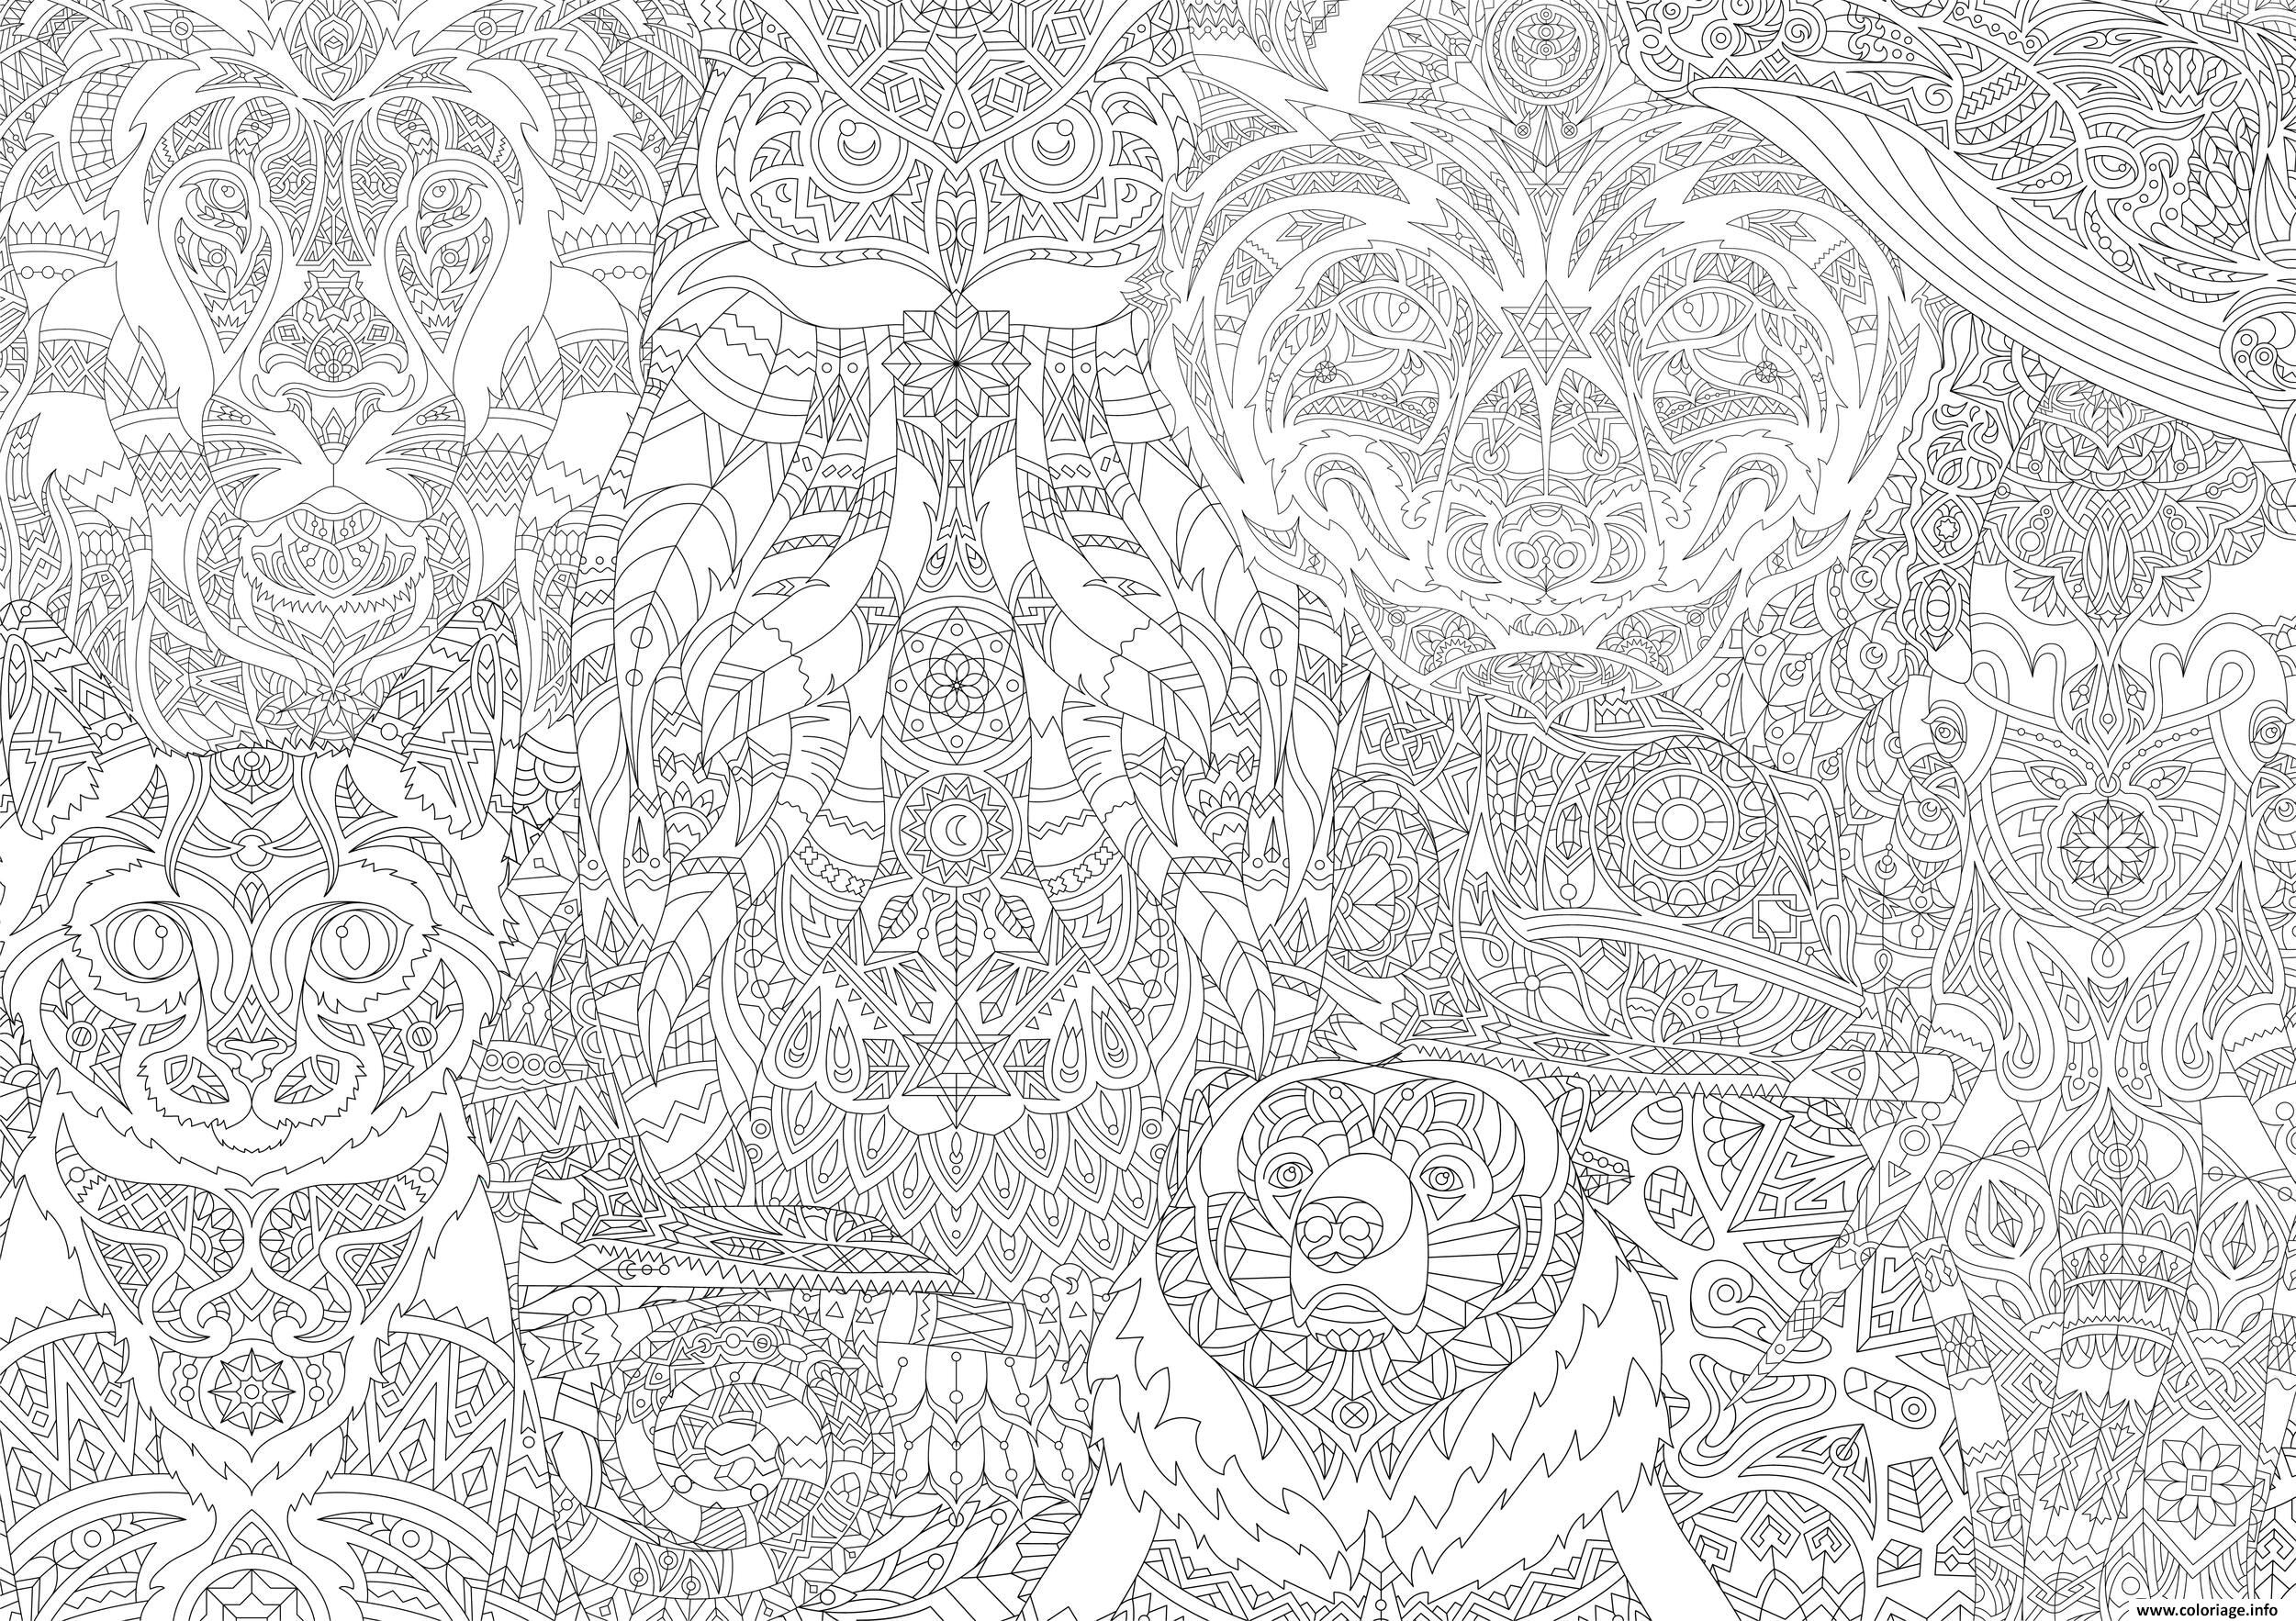 https://coloriage.info/images/ccovers/1560196595adulte-animaux-zentangle-difficile-2019.jpg